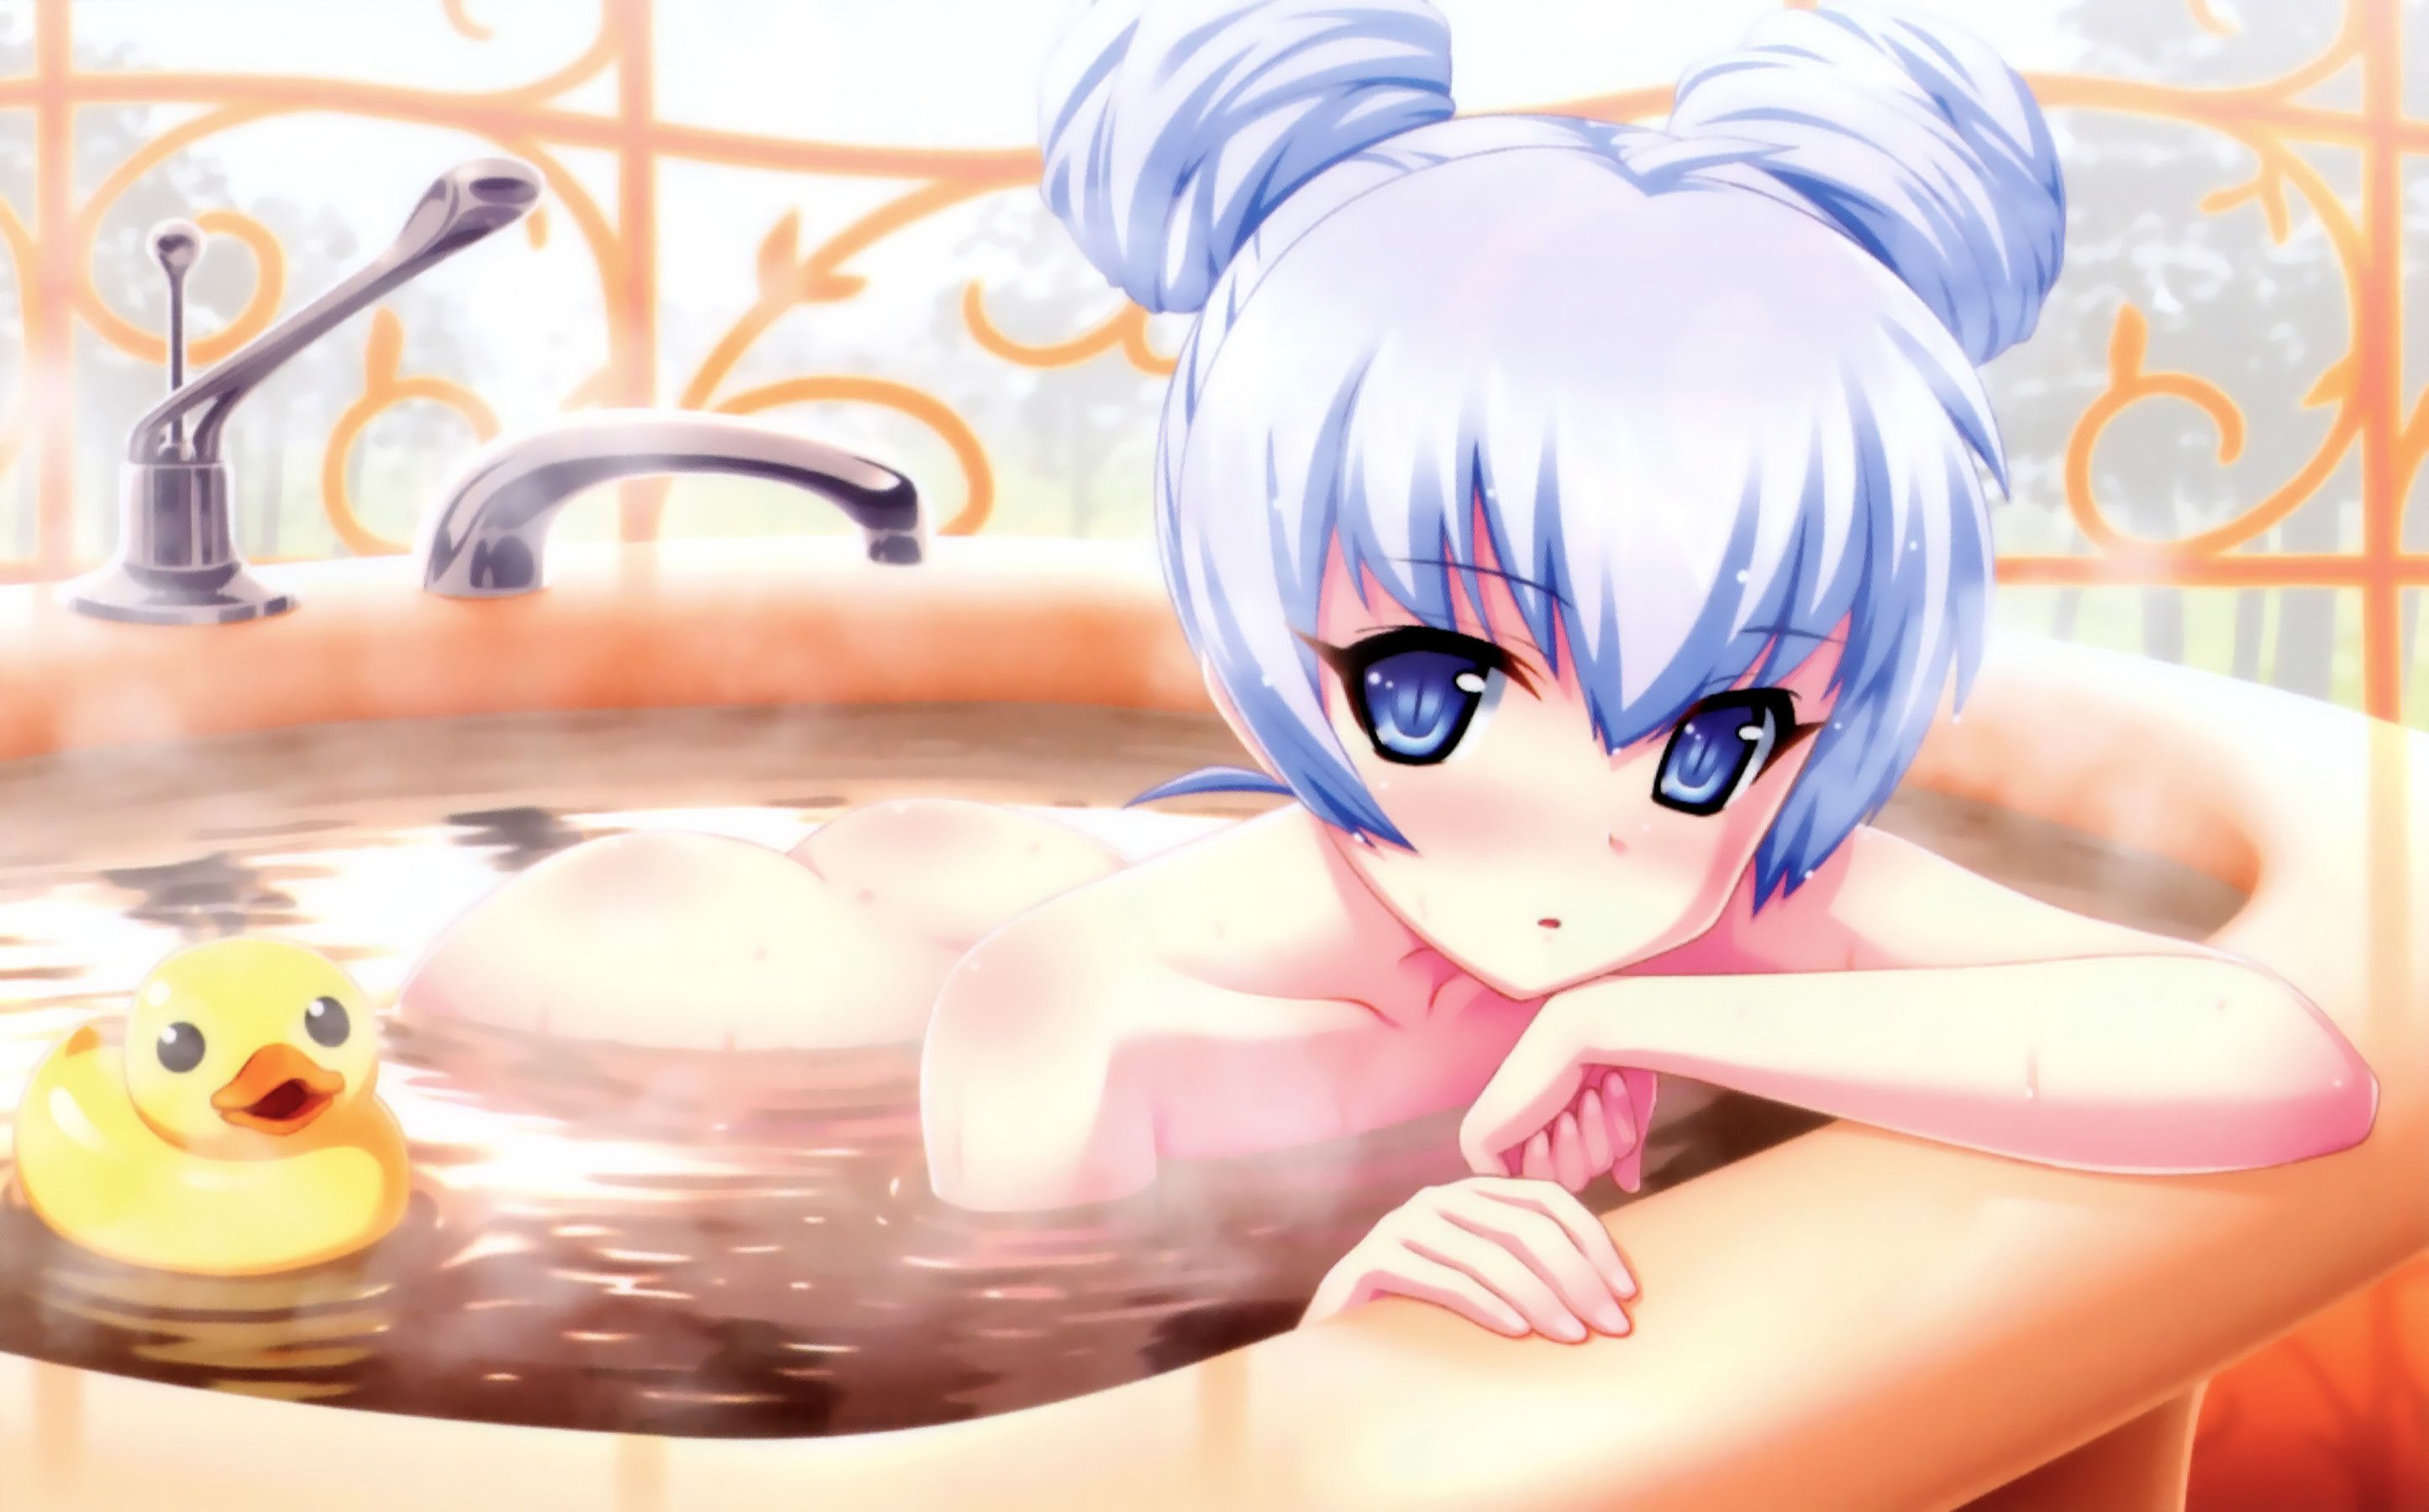 Bath image that I want to do lewd thing covered with foam 16